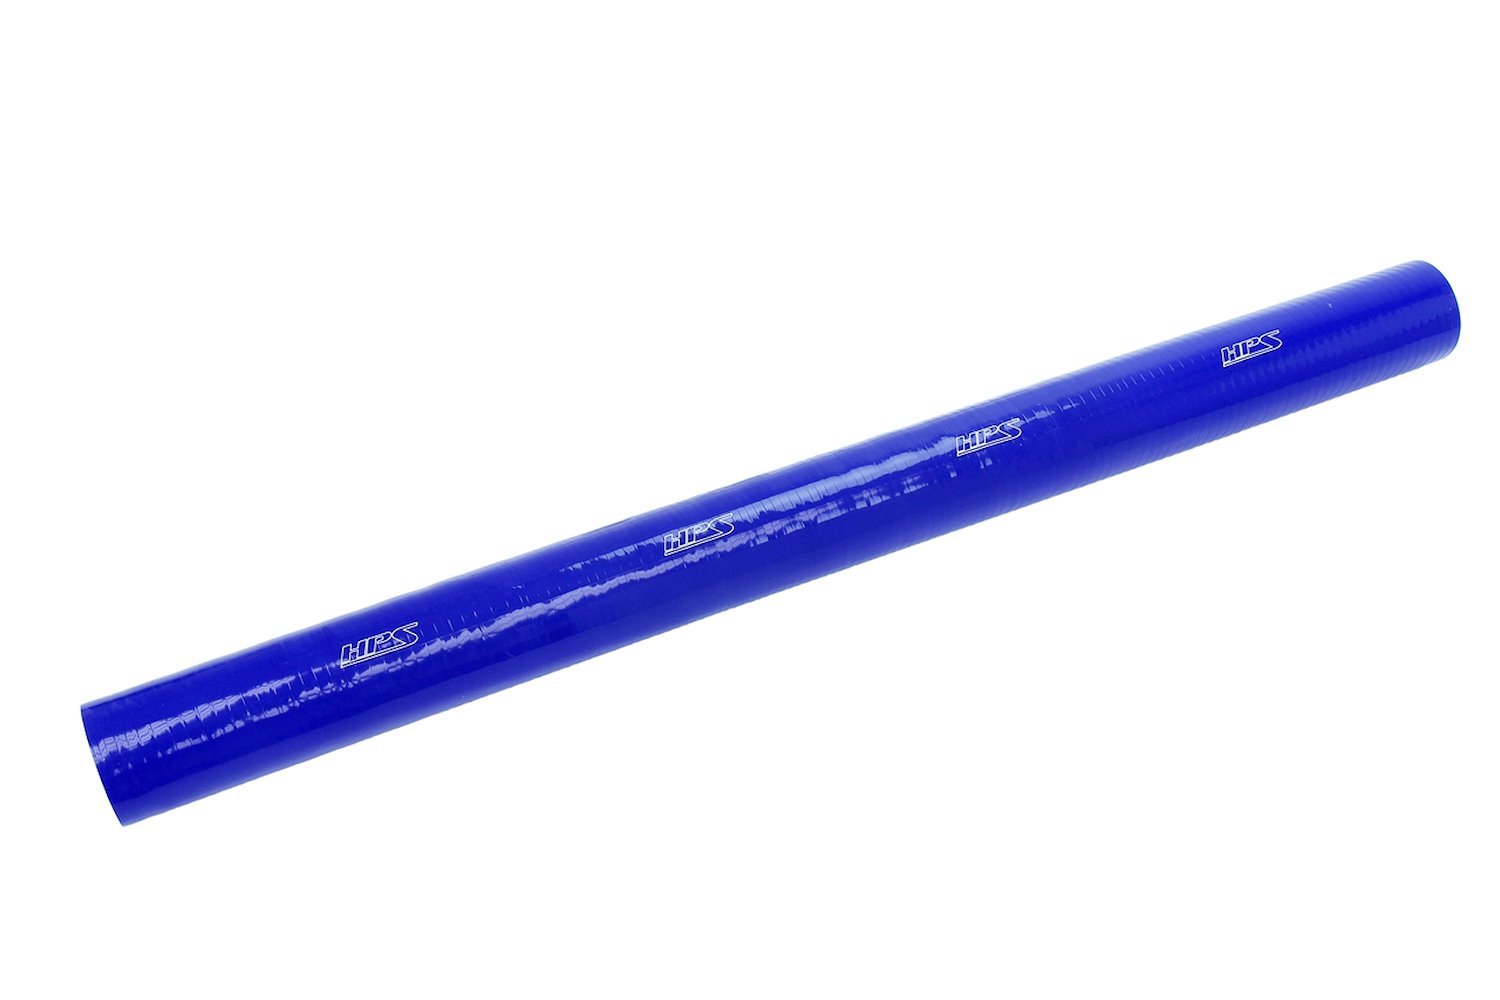 HTST-3F-650-BLUE Silicone Coolant Tube, High-Temp 6-Ply Reinforced, 6-1/2 in. ID, 3 ft. Long, Blue